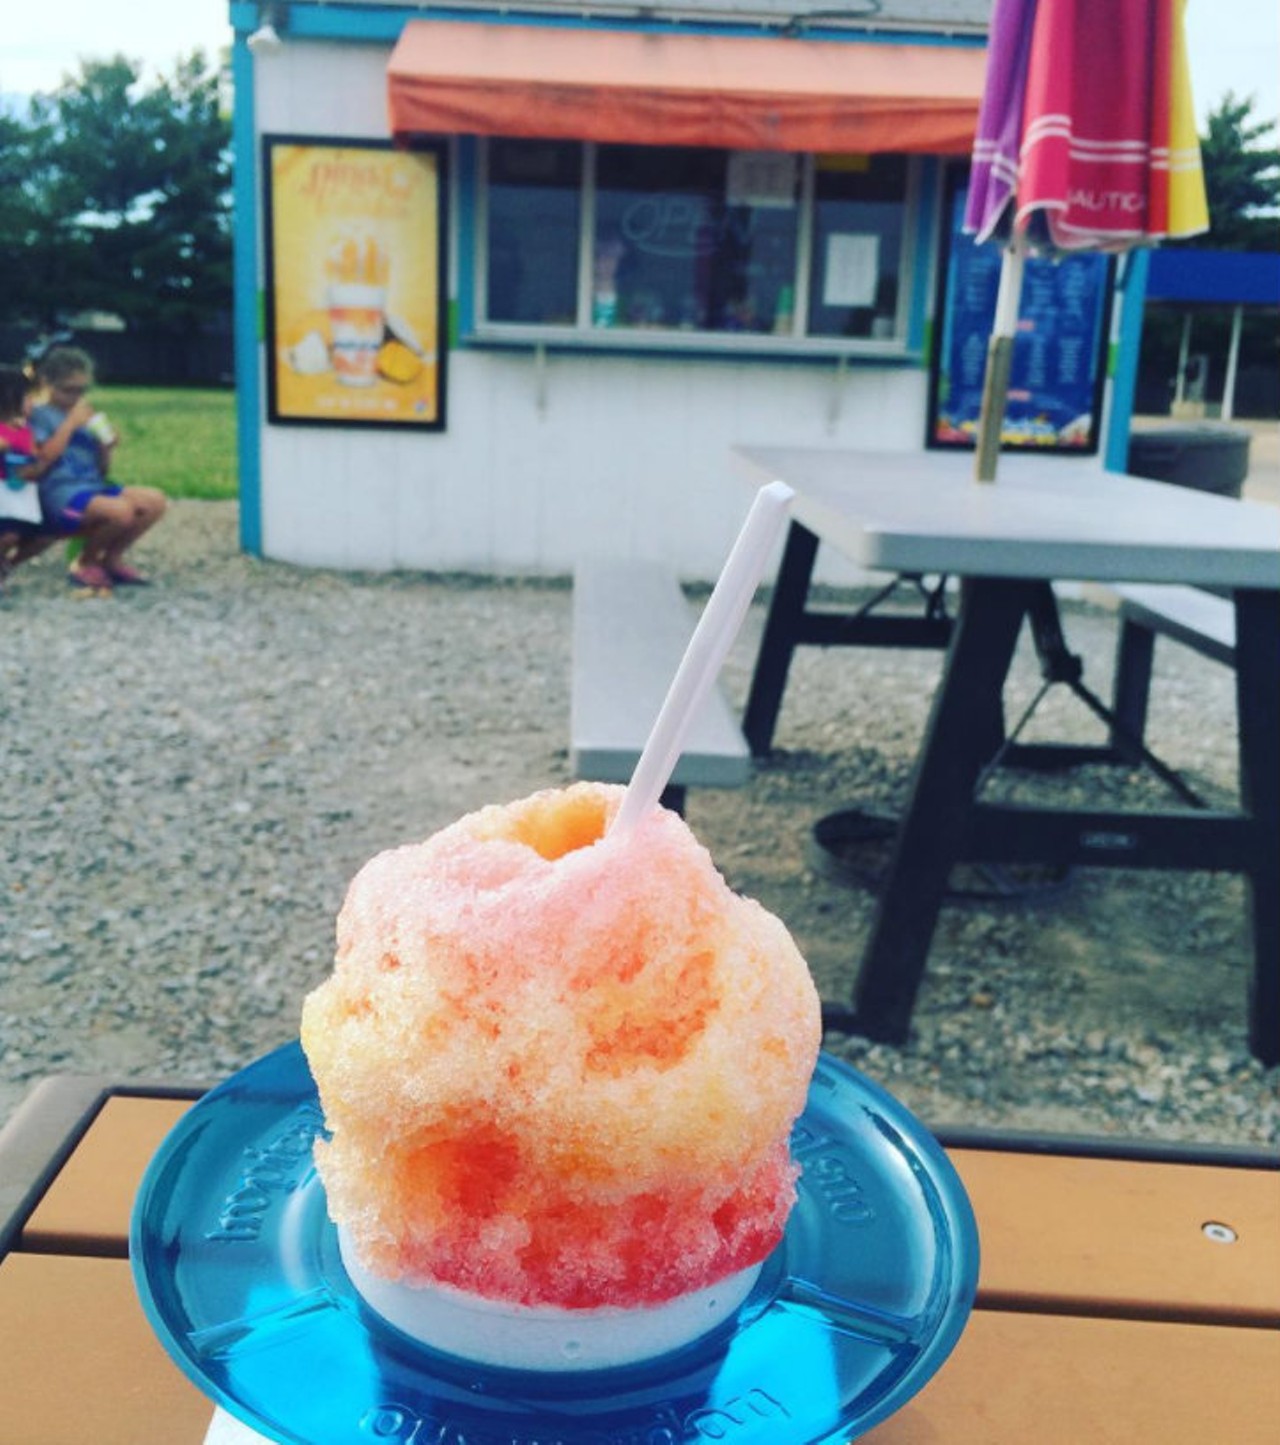 The 2017 feature flavors at Tropical Sno include Paradise Island, Volcano and Peach Coconilla. Sounds good to us. Photo of JNS Tropical Sno courtesy of Instagram / lilmissmermaid.